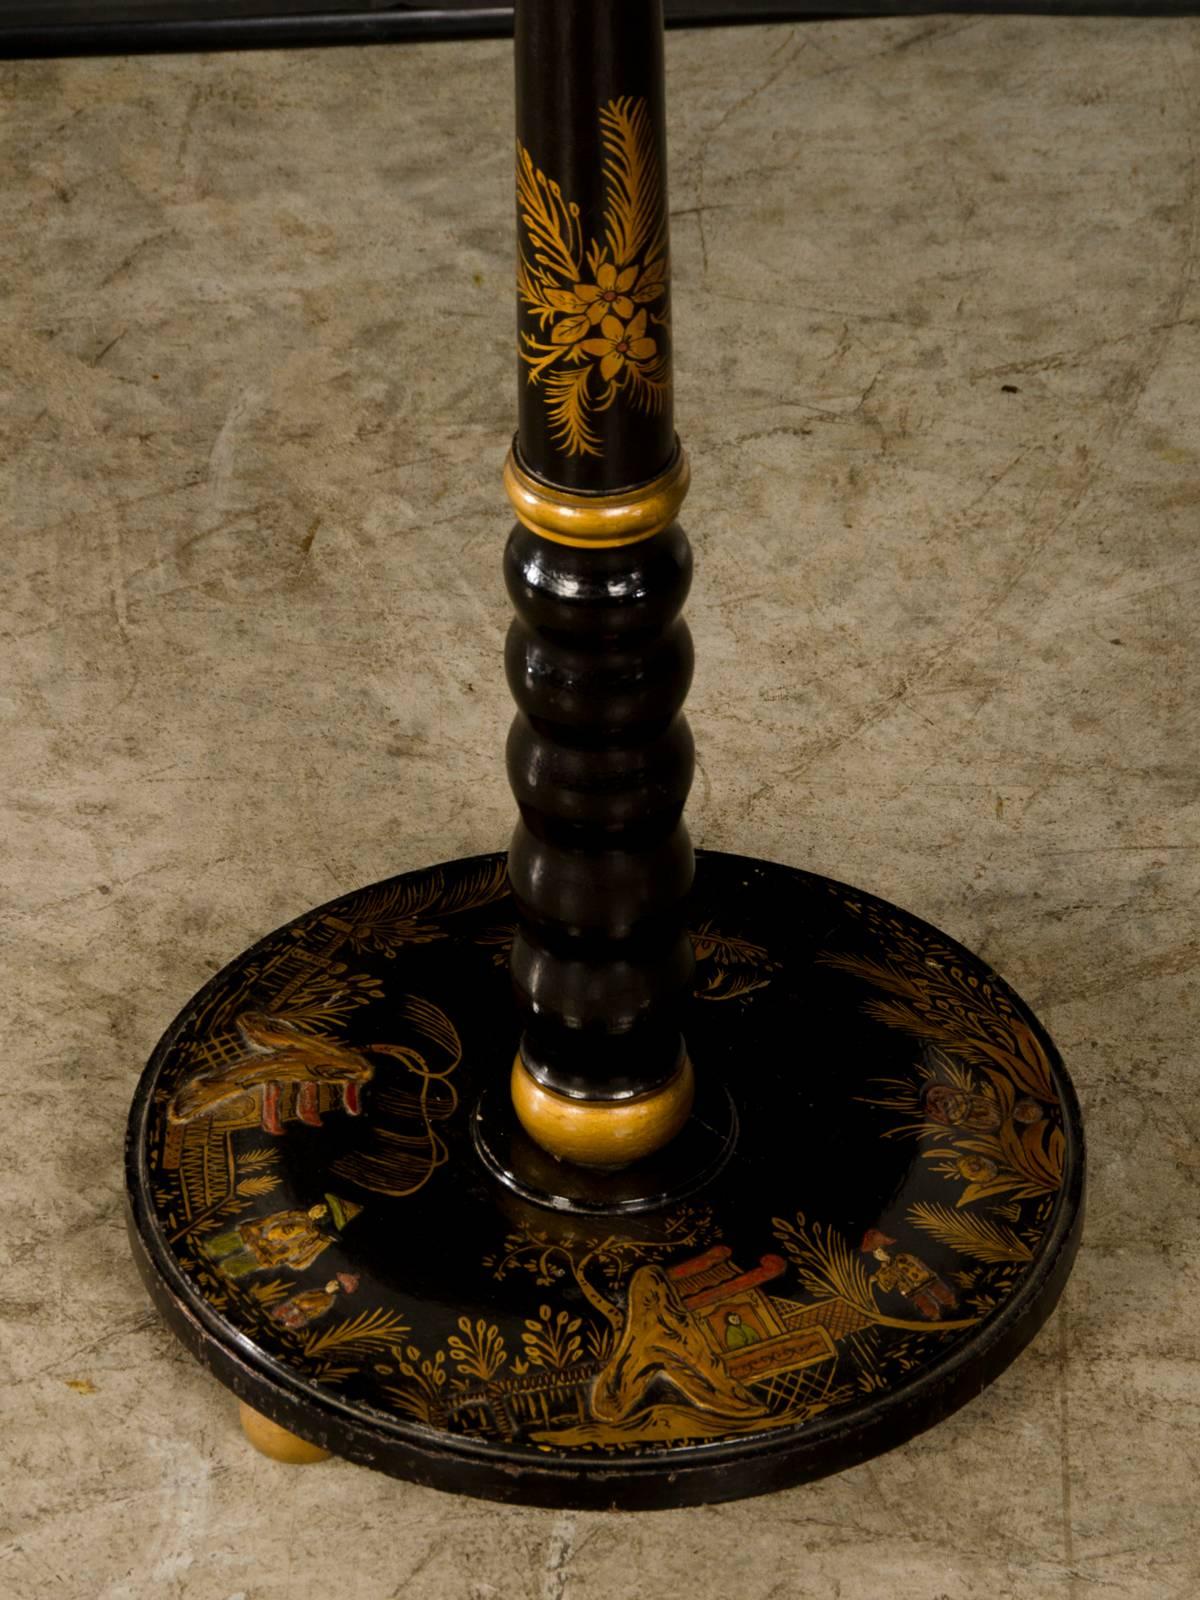 Be the first to see our new listings direct from 1stdibs! Please click "Follow" below. 

An elegant antique English black lacquered floor lamp with the original chinoiserie style decoration from the Edwardian period in England, circa